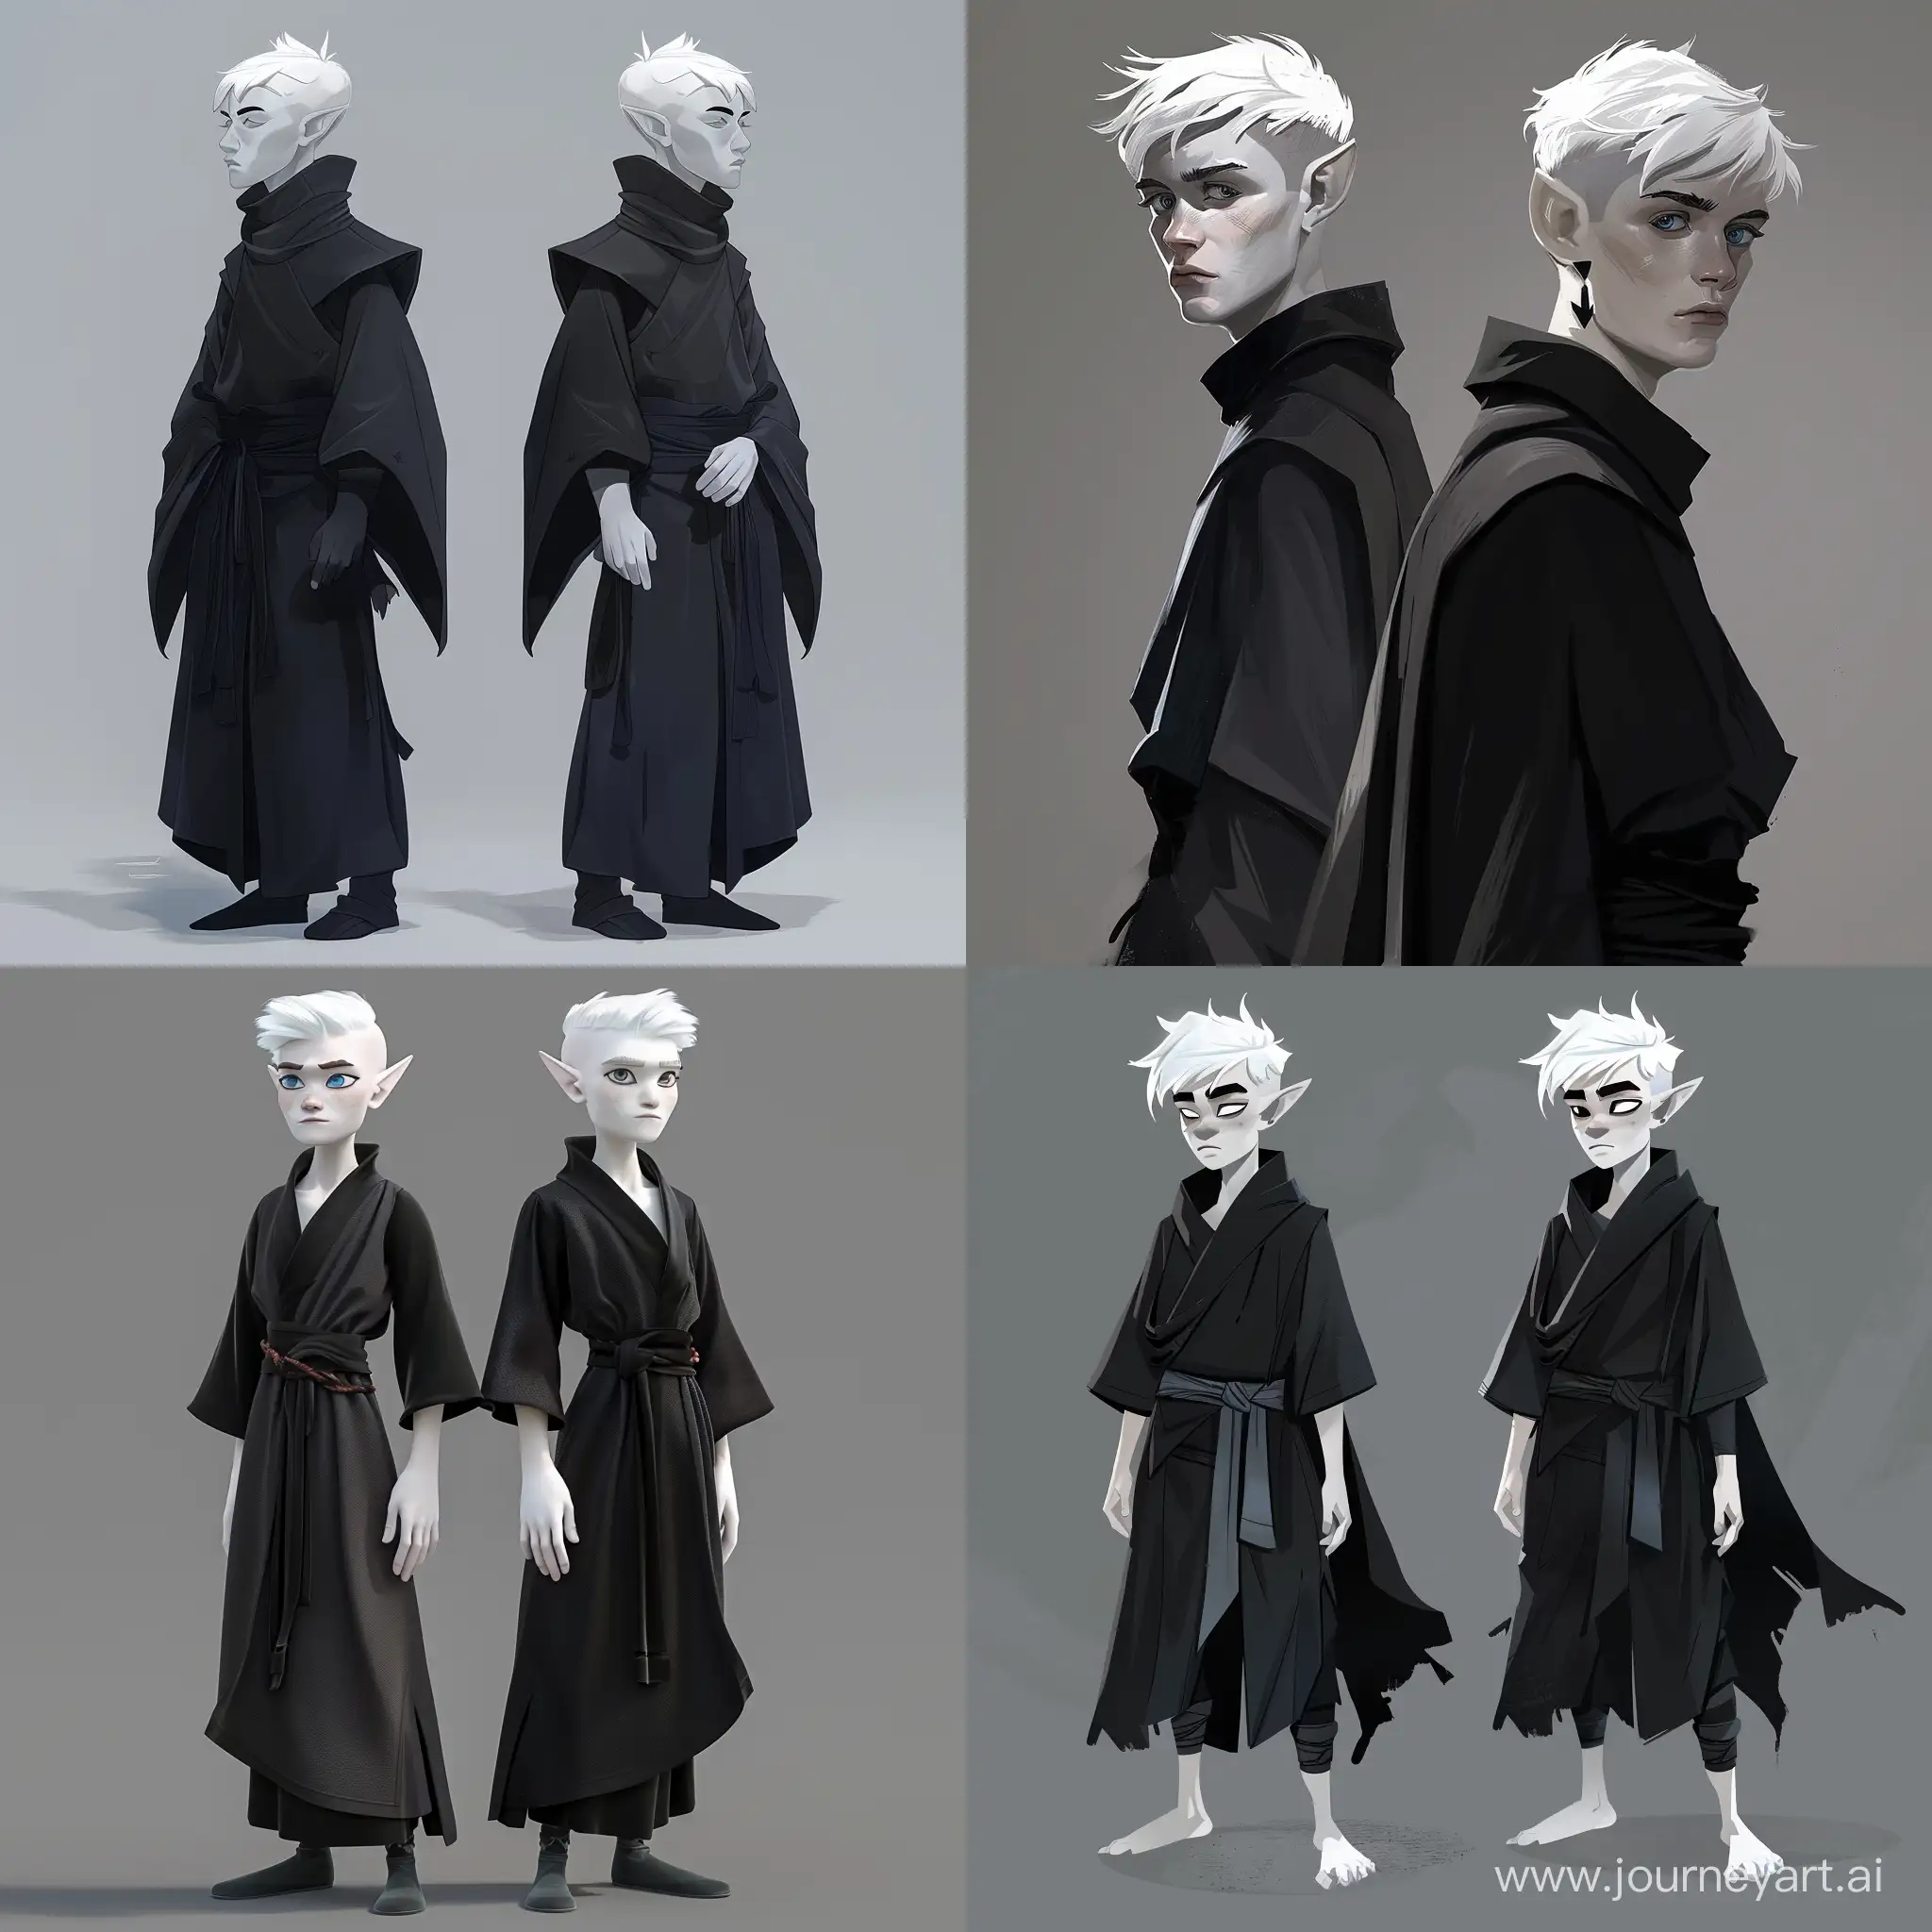 cool young rogue and monk d&d character, charismatic, short hair, white skin, black aprentice robes. dramatic, Kami and Kevin Areopagita animation style